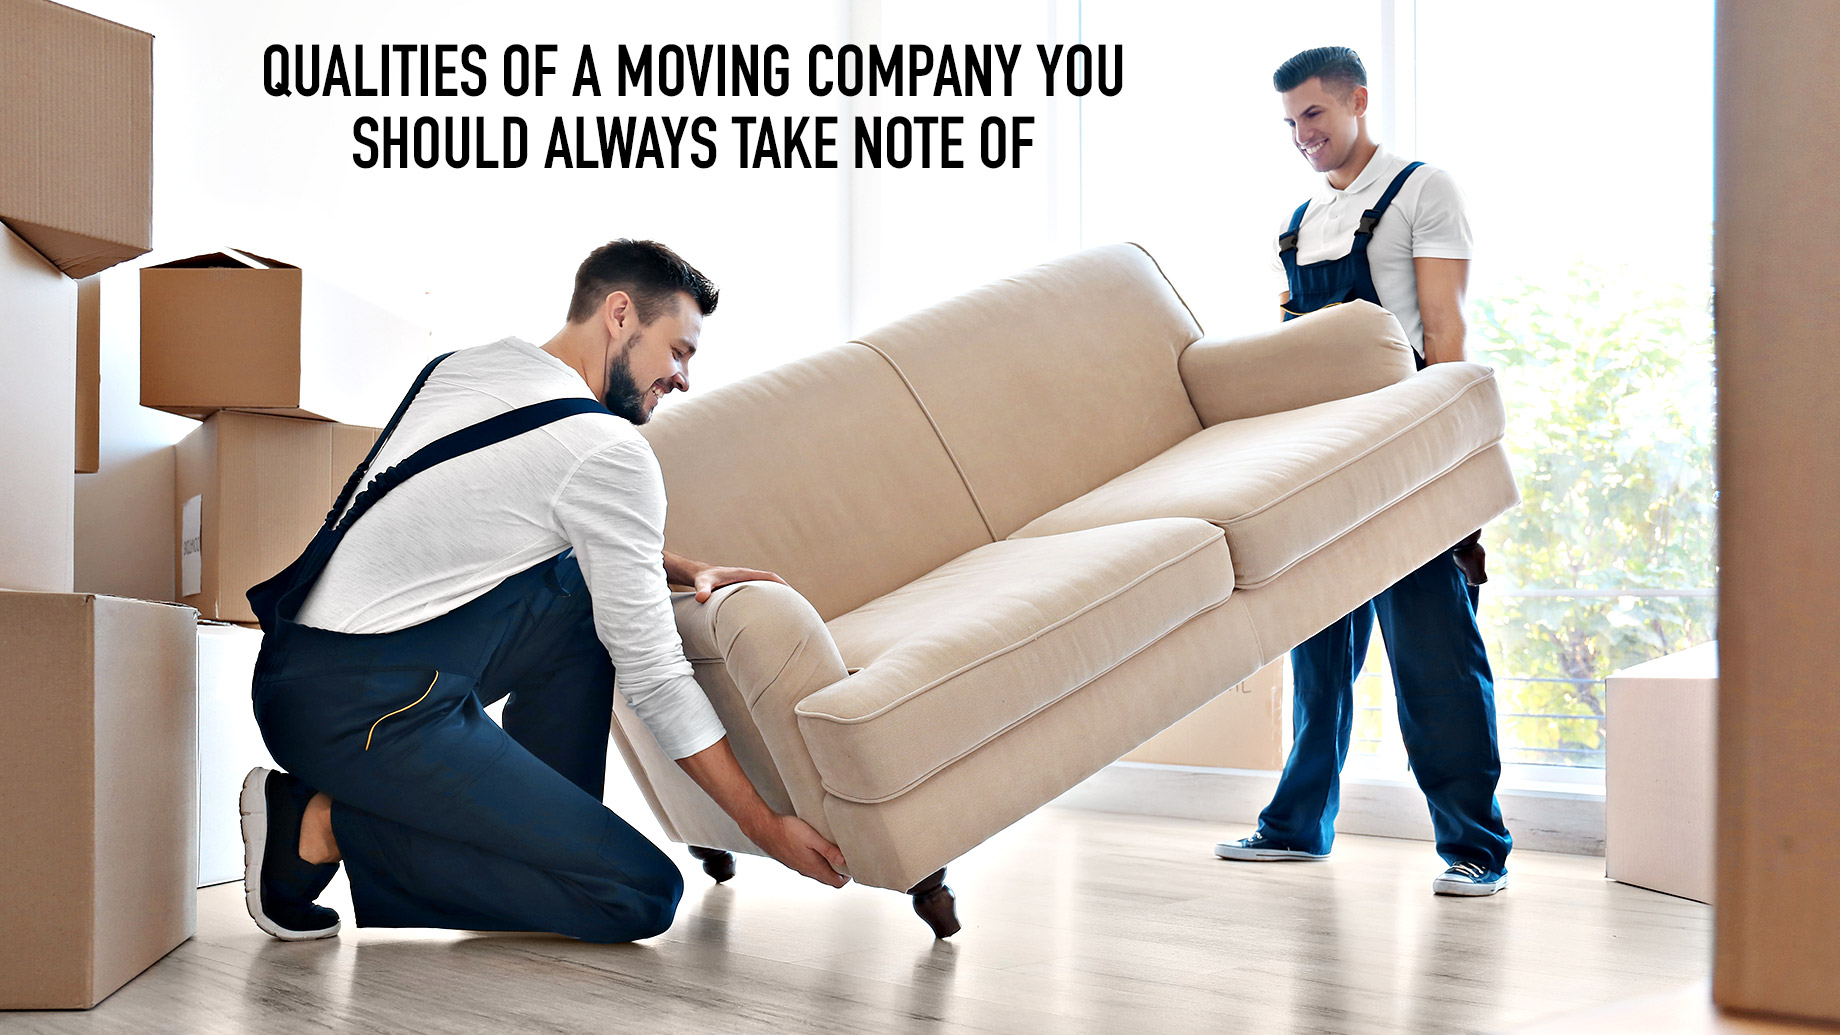 Qualities Of A Moving Company You Should Always Take Note Of